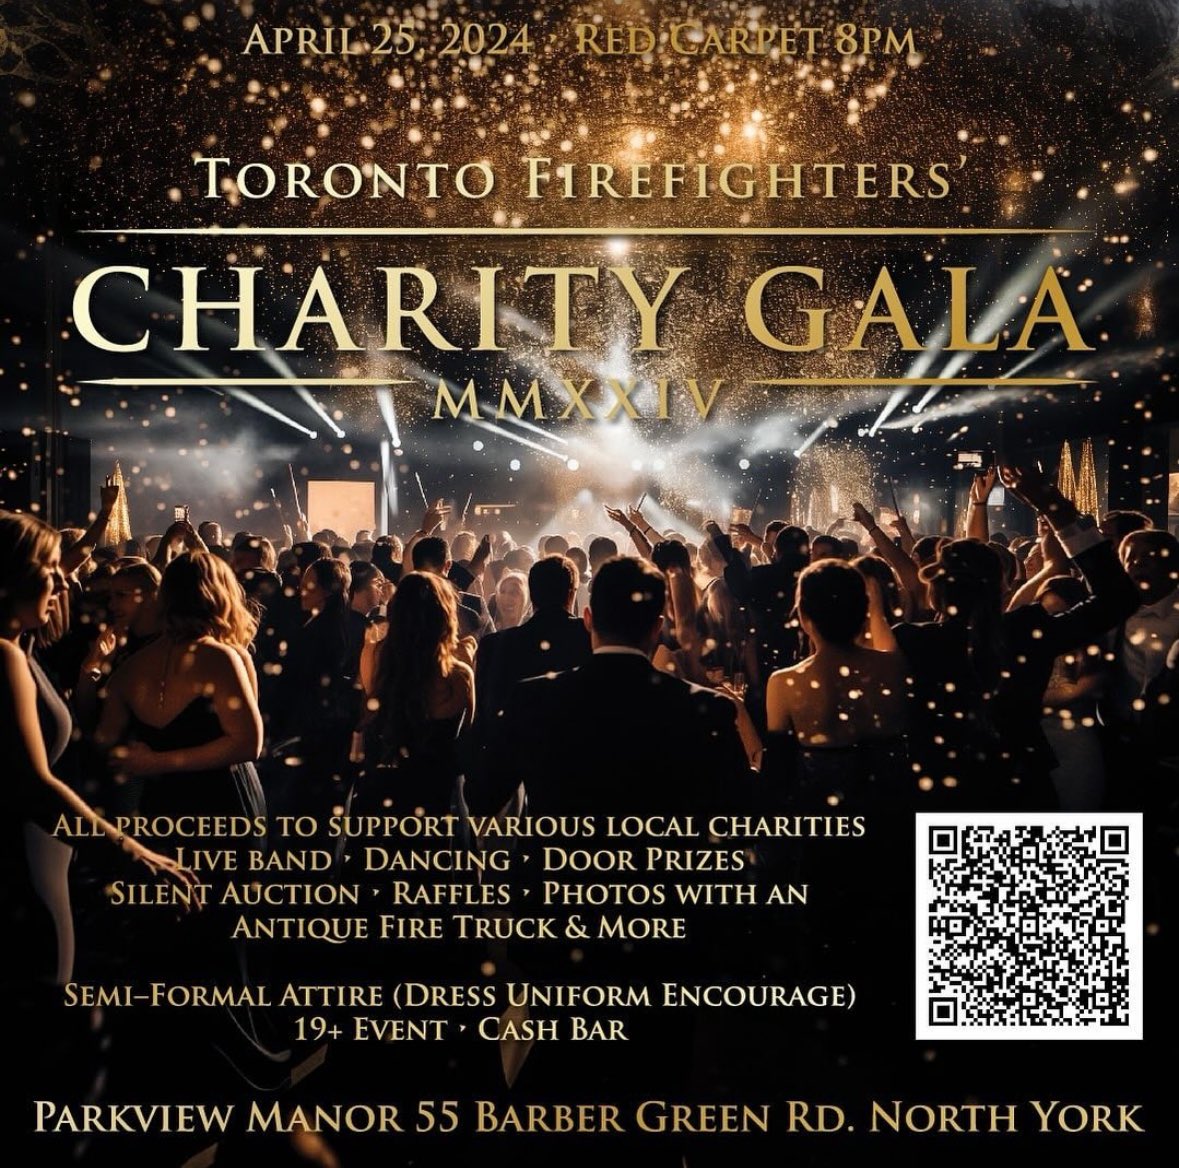 The TPFFA Charity Gala is tomorrow night. Open to the public, there are still some tickets left, use the QR code. See you tomorrow.